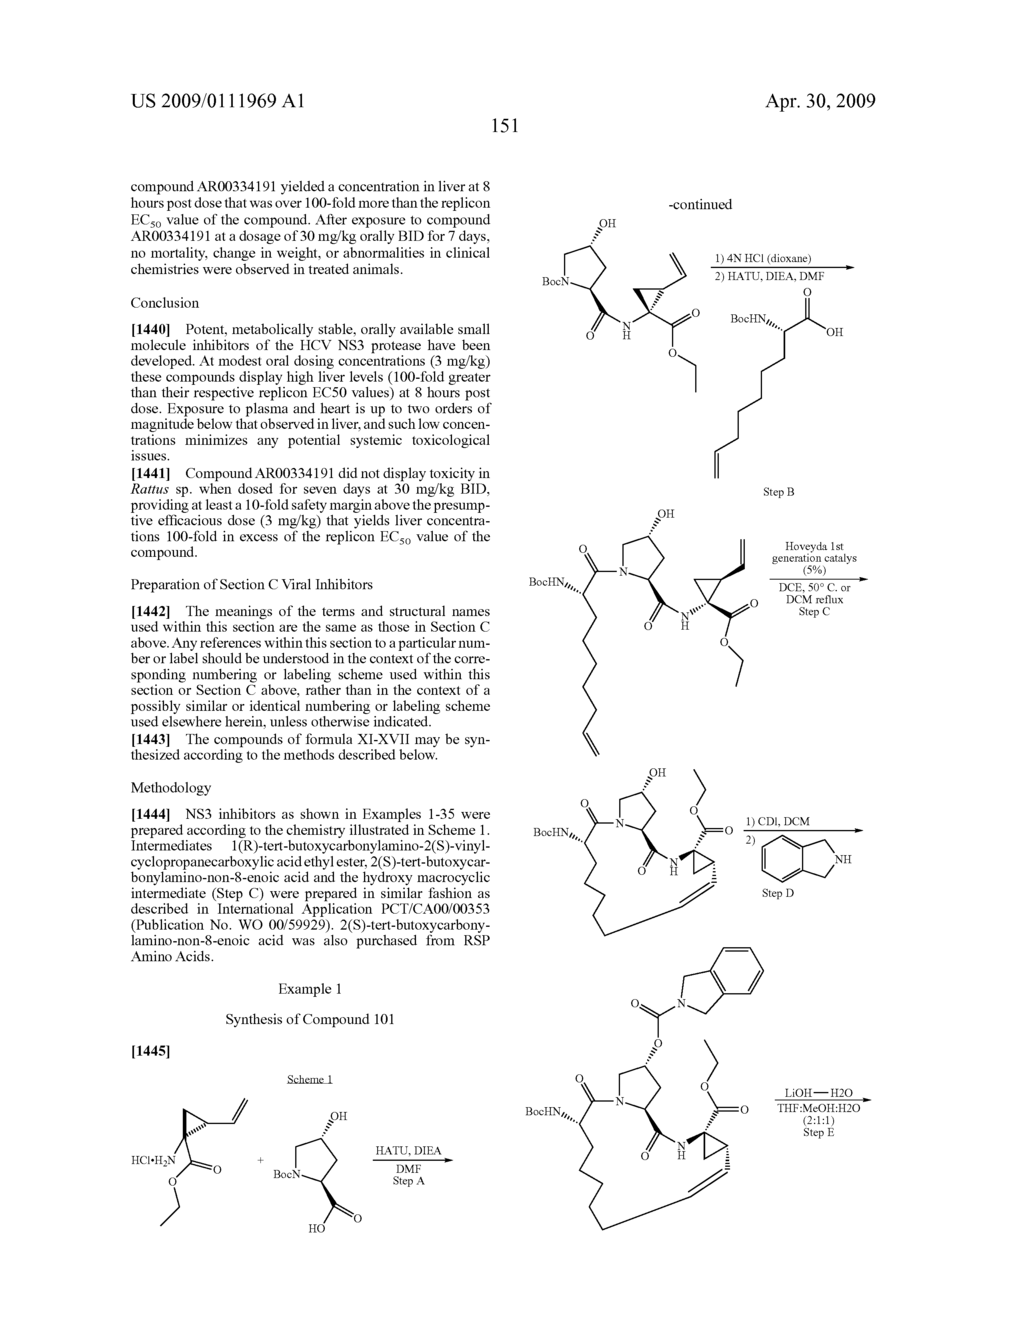 MACROCYCLIC COMPOUNDS AS INHIBITORS OF VIRAL REPLICATION - diagram, schematic, and image 152